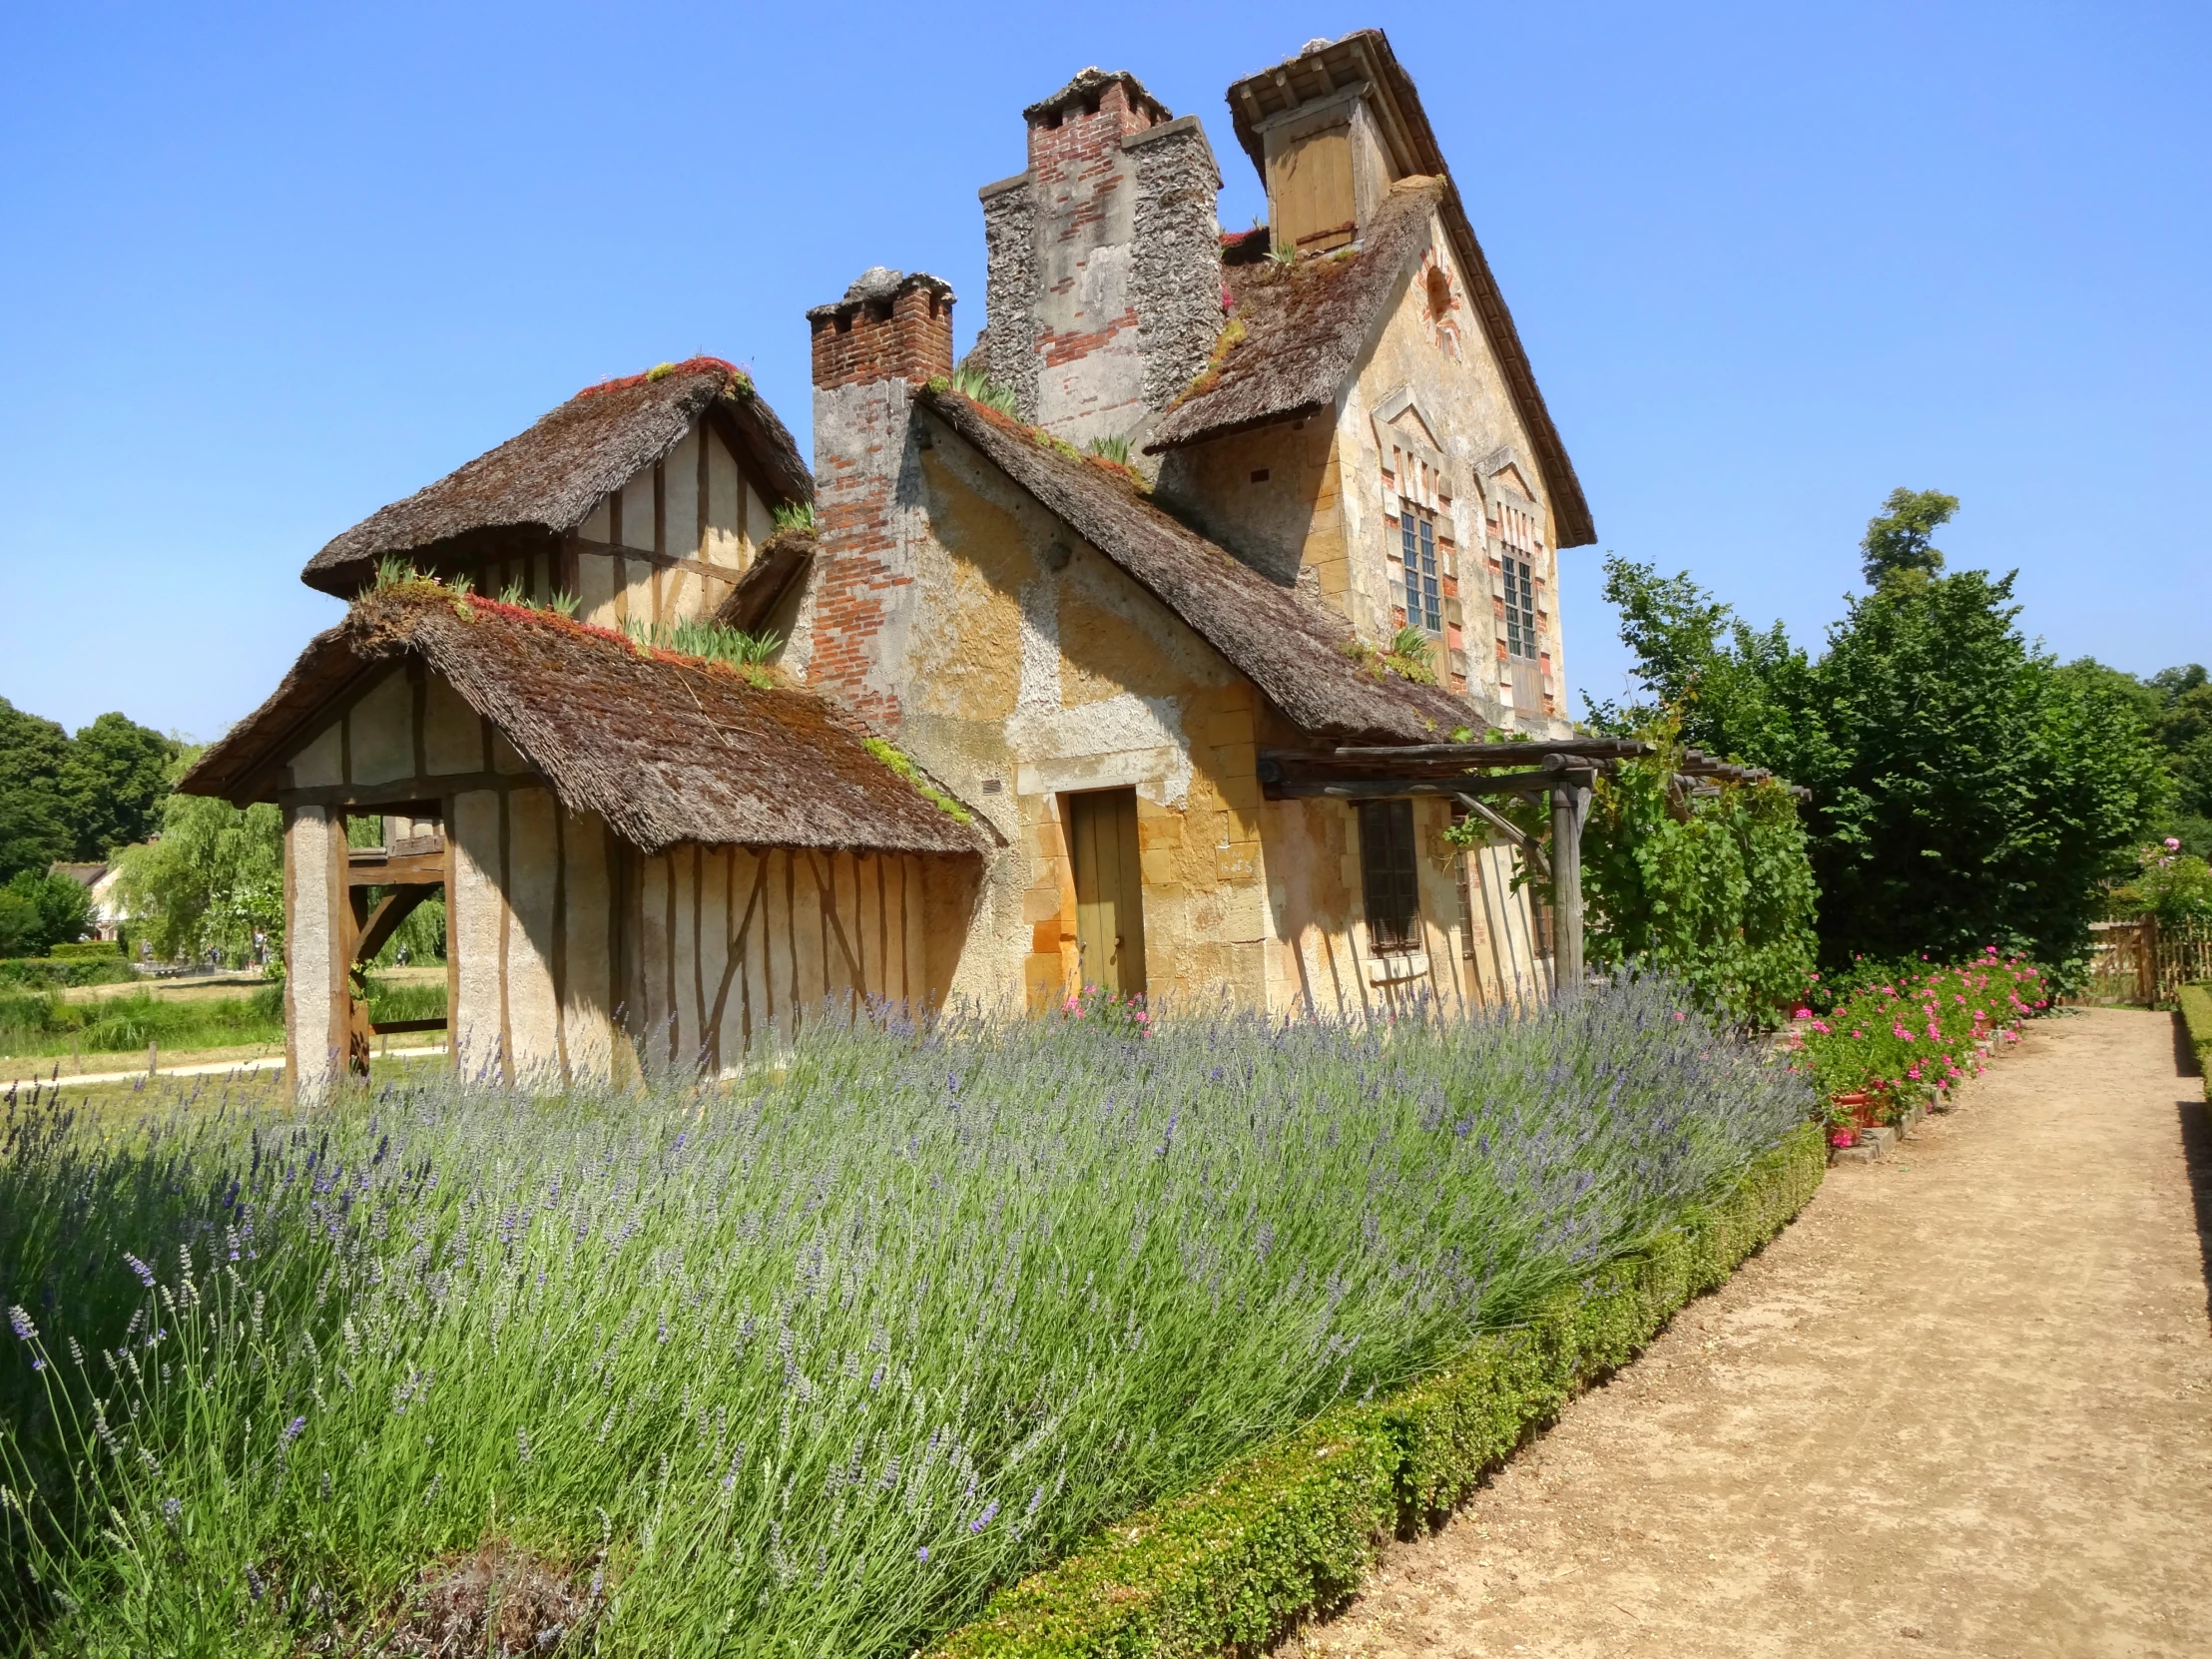 the exterior of an old stone house with lavender growing in front